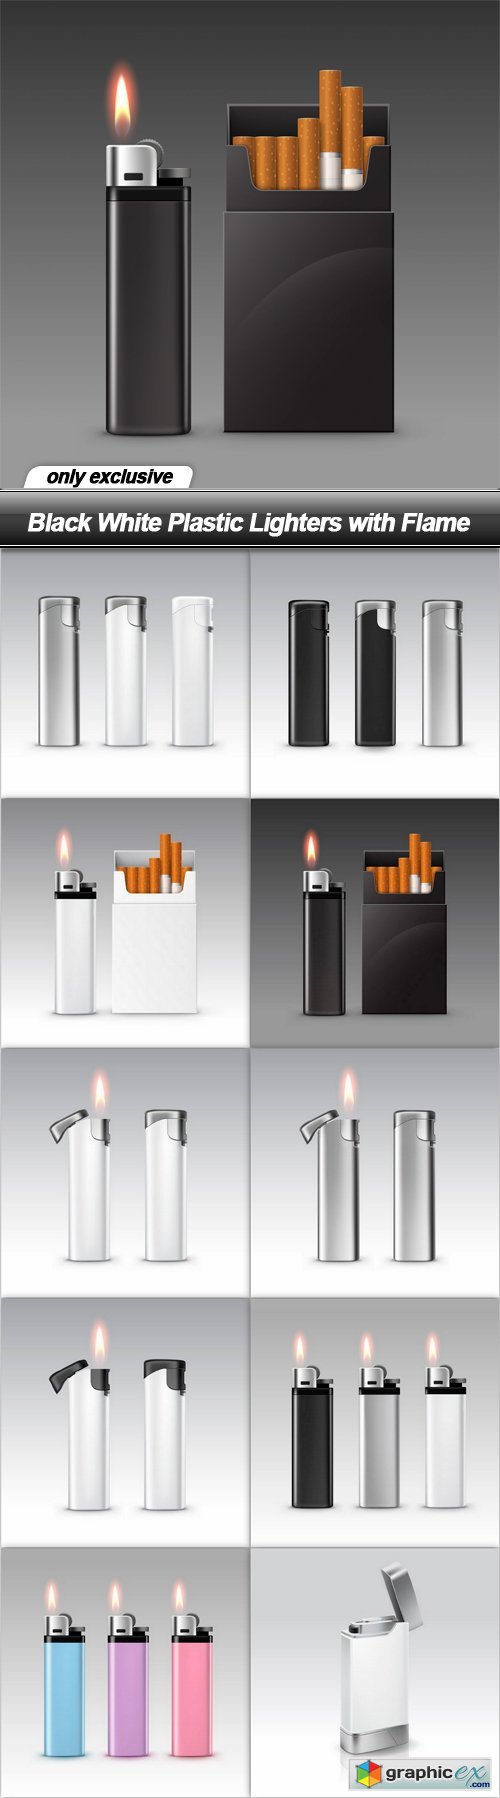 Black White Plastic Lighters with Flame - 10 EPS